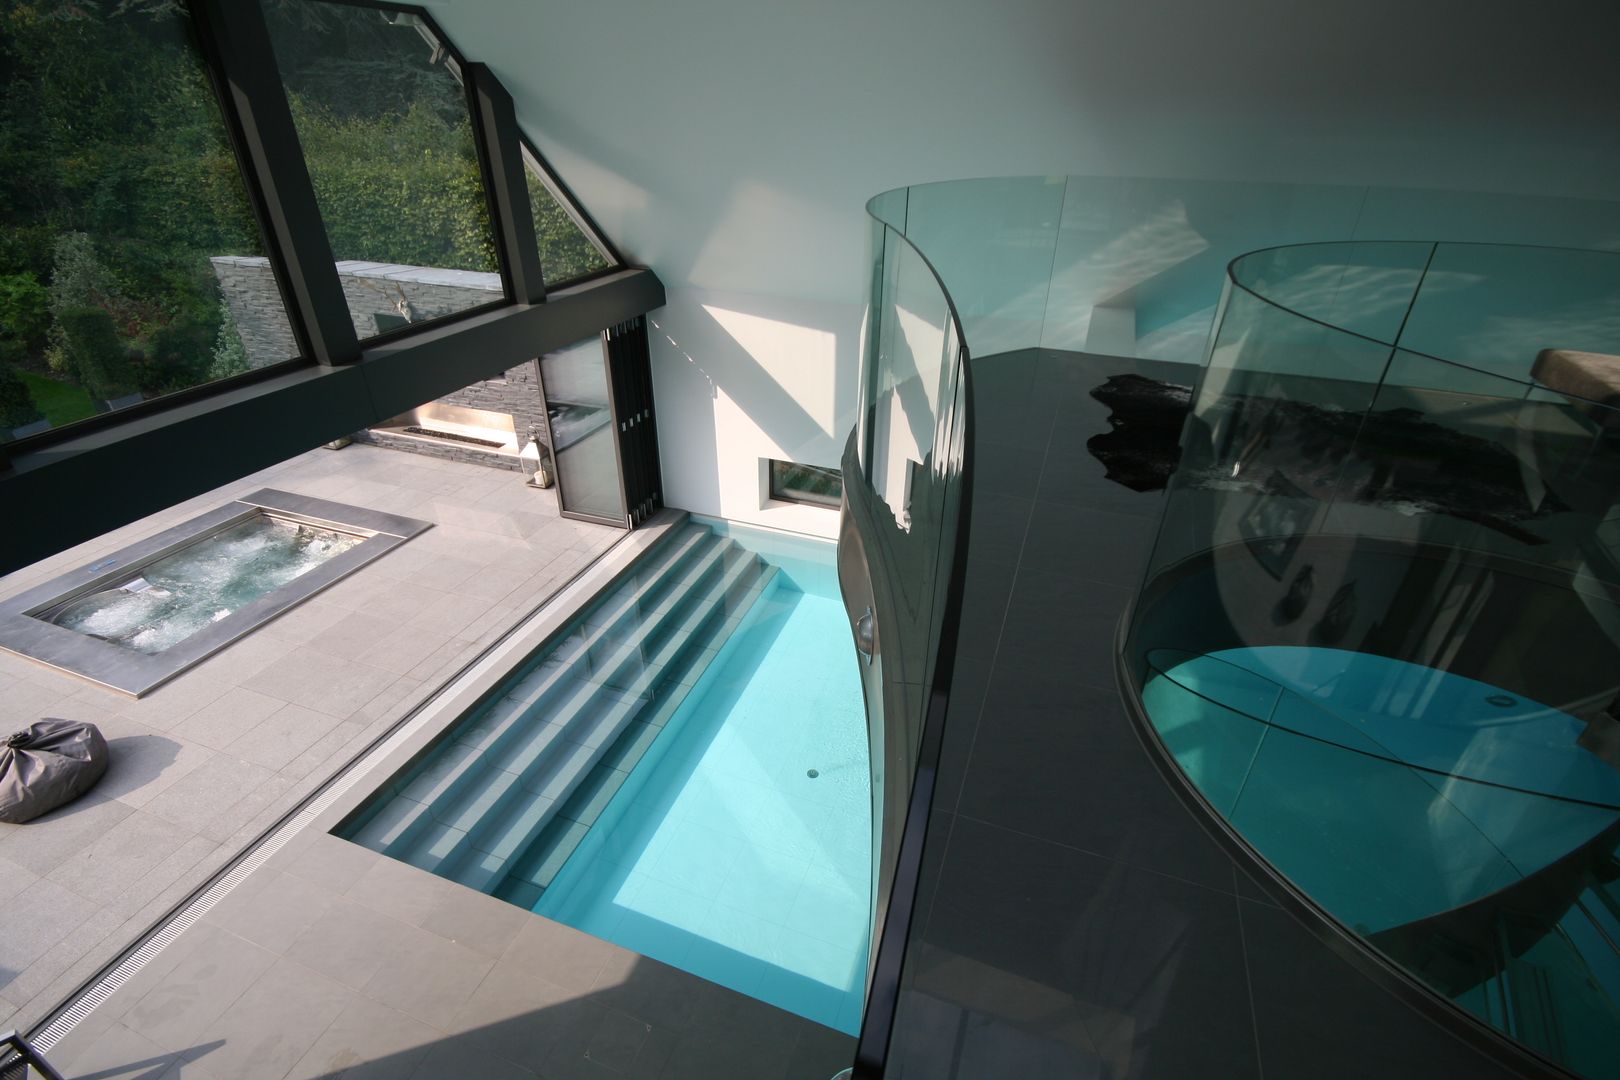 Indoor pool with waterfall features, sauna and stainless steel spa, Tanby Pools Tanby Pools Piscinas modernas